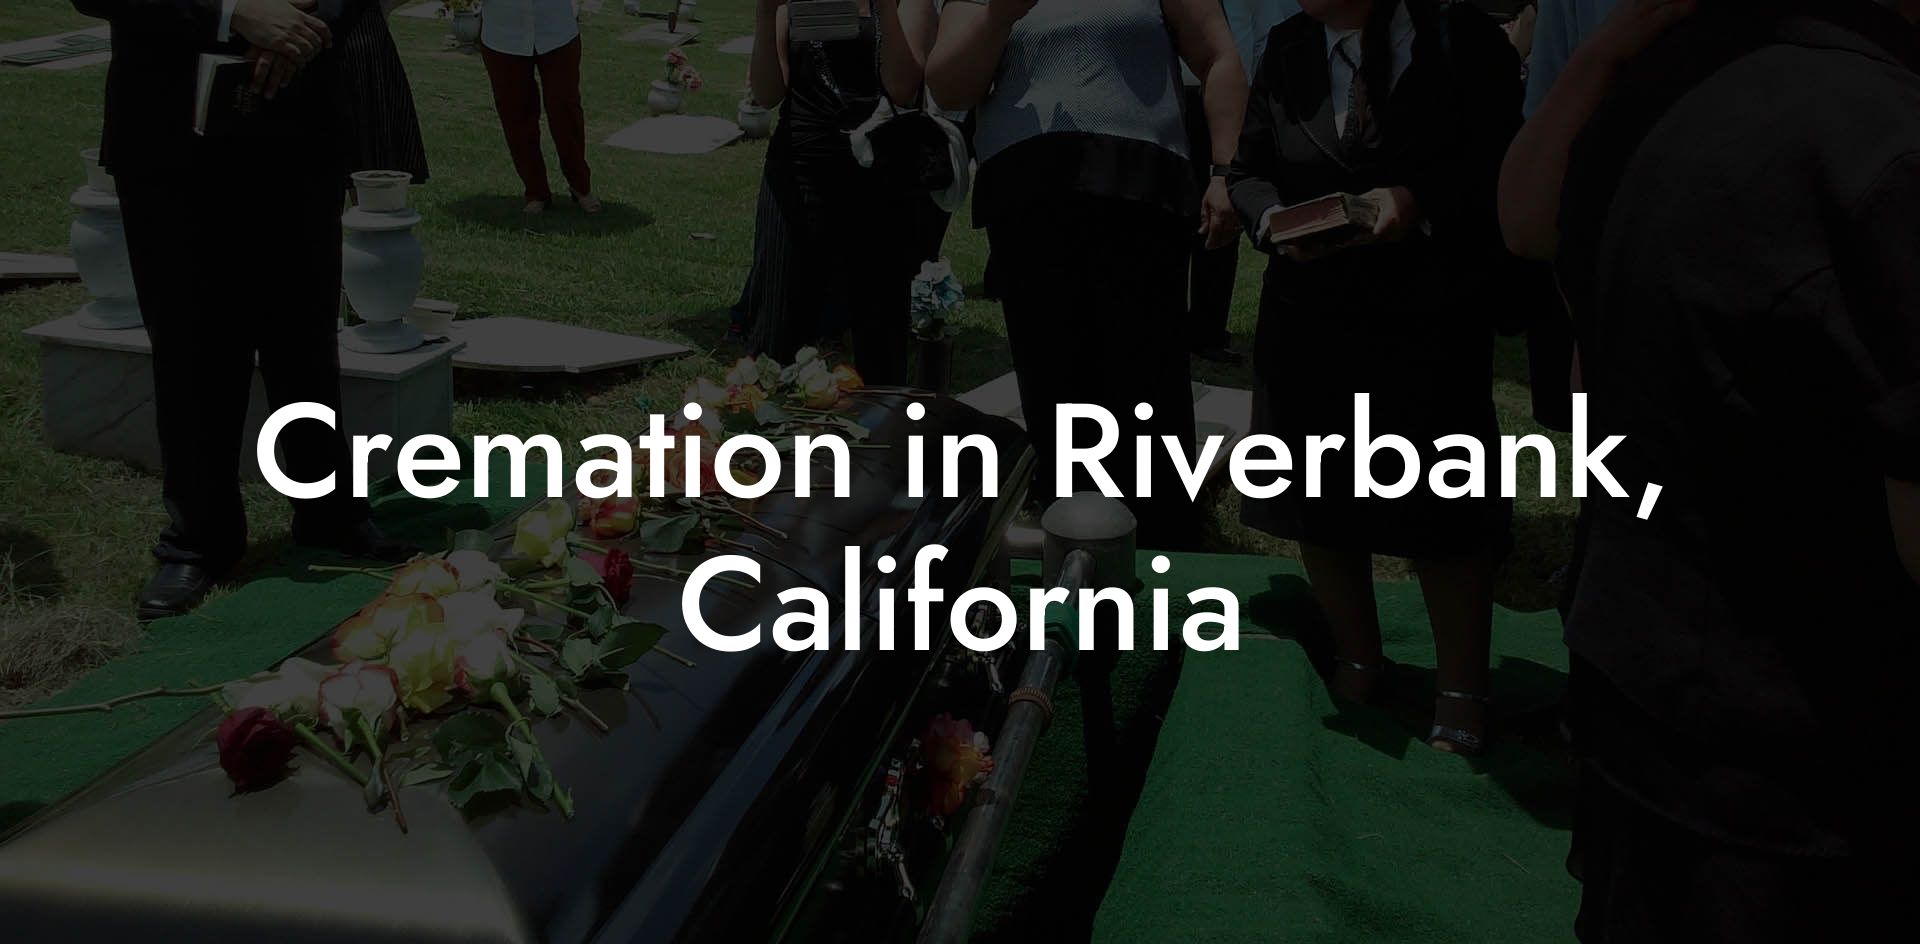 Cremation in Riverbank, California